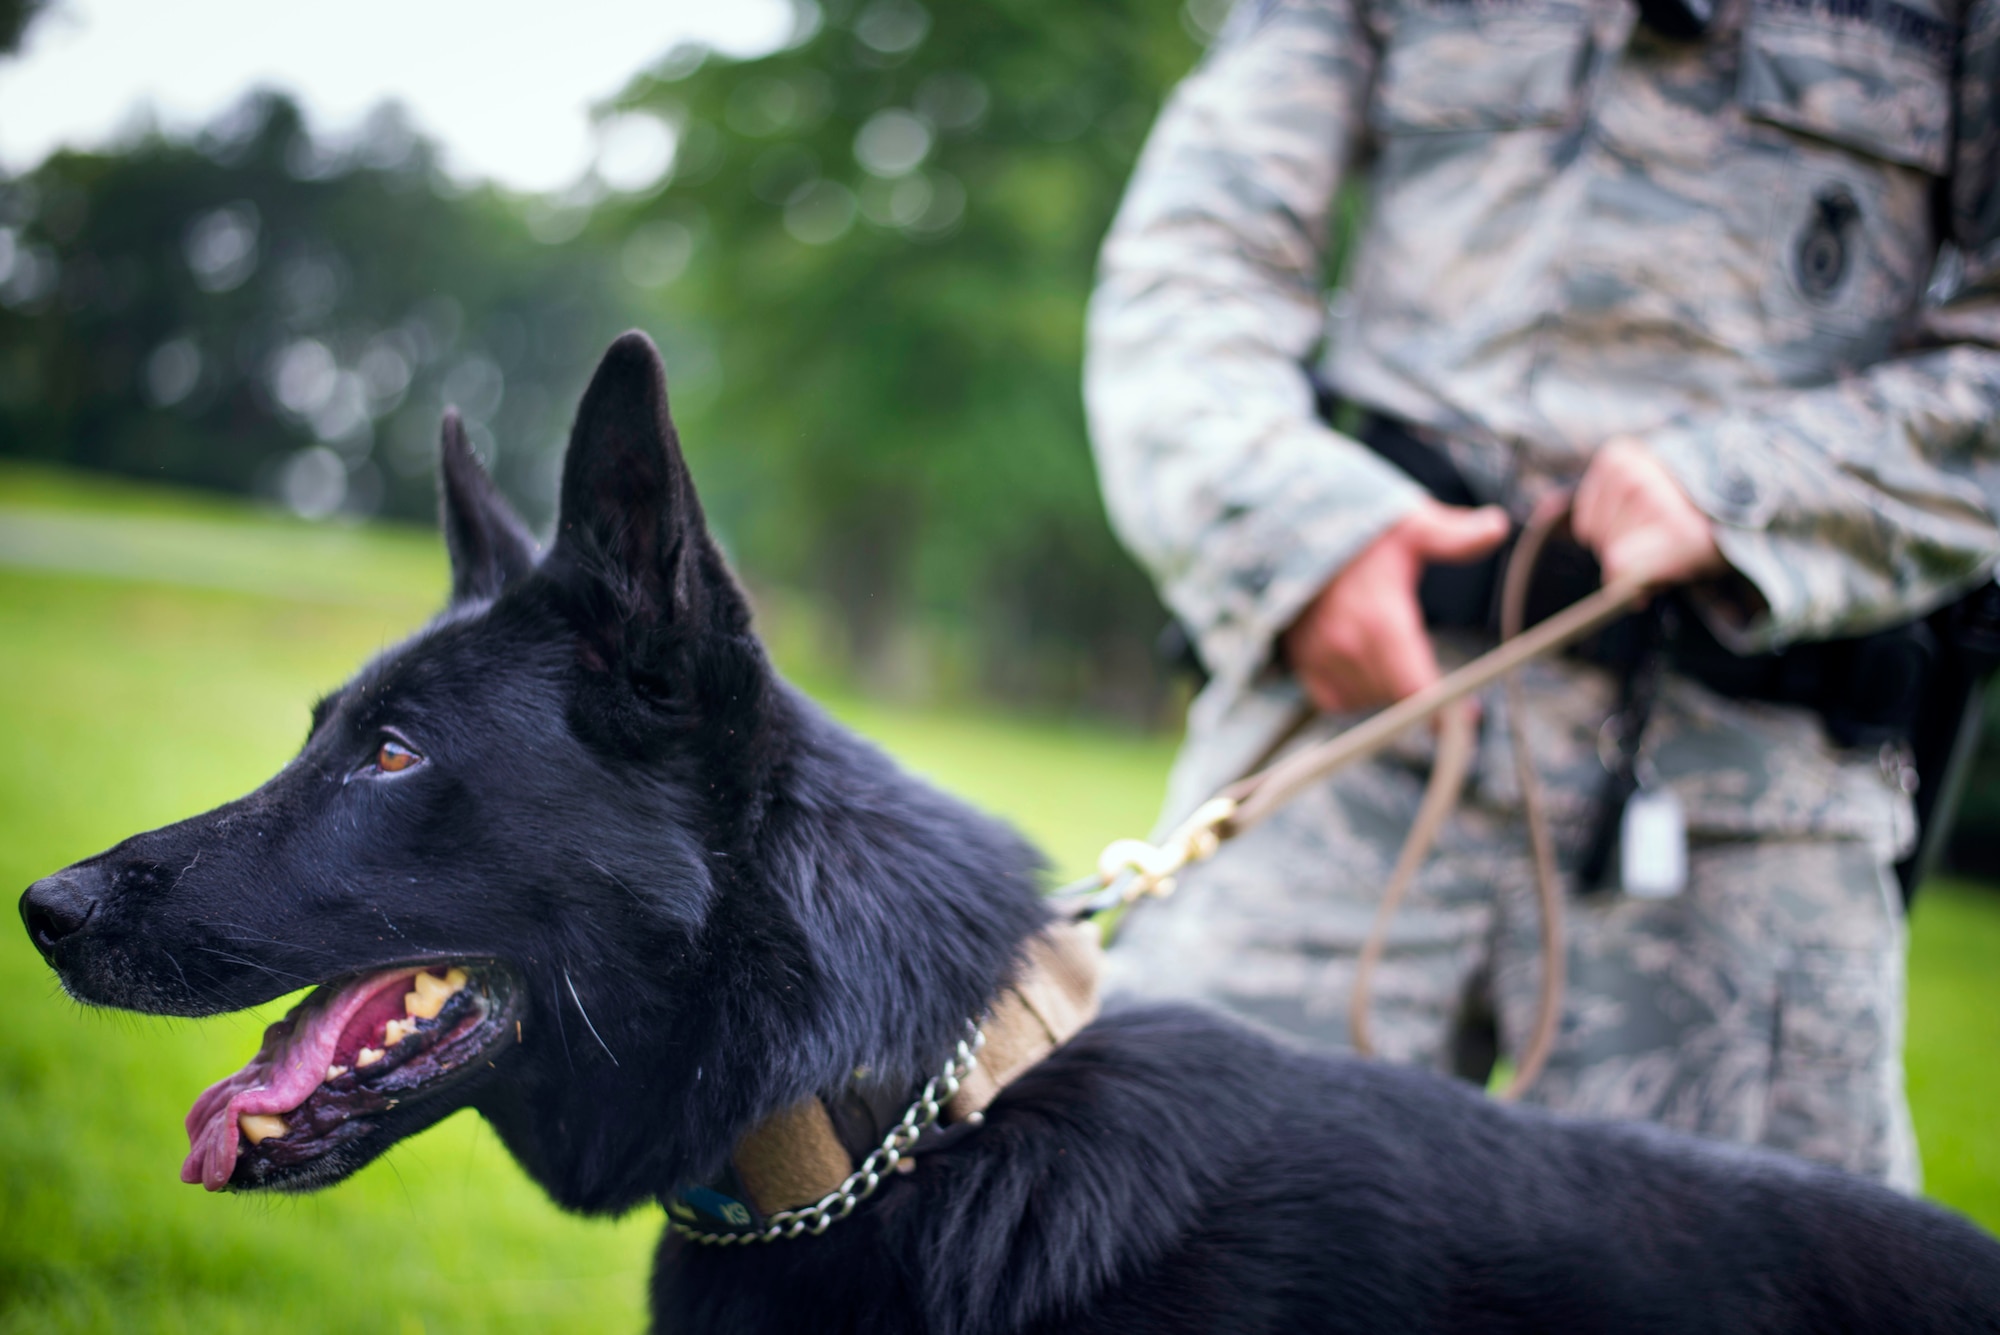 Dixie, 11th Security Support Squadron military working dog, watches a simulated suspect during controlled aggression training at Joint Base Andrews, Md., July 29, 2015. Controlled aggression techniques are used to intimidate or "take down" a potential suspect. (U.S. Air Force photo by Staff Sgt. Chad C. Strohmeyer)(Released)